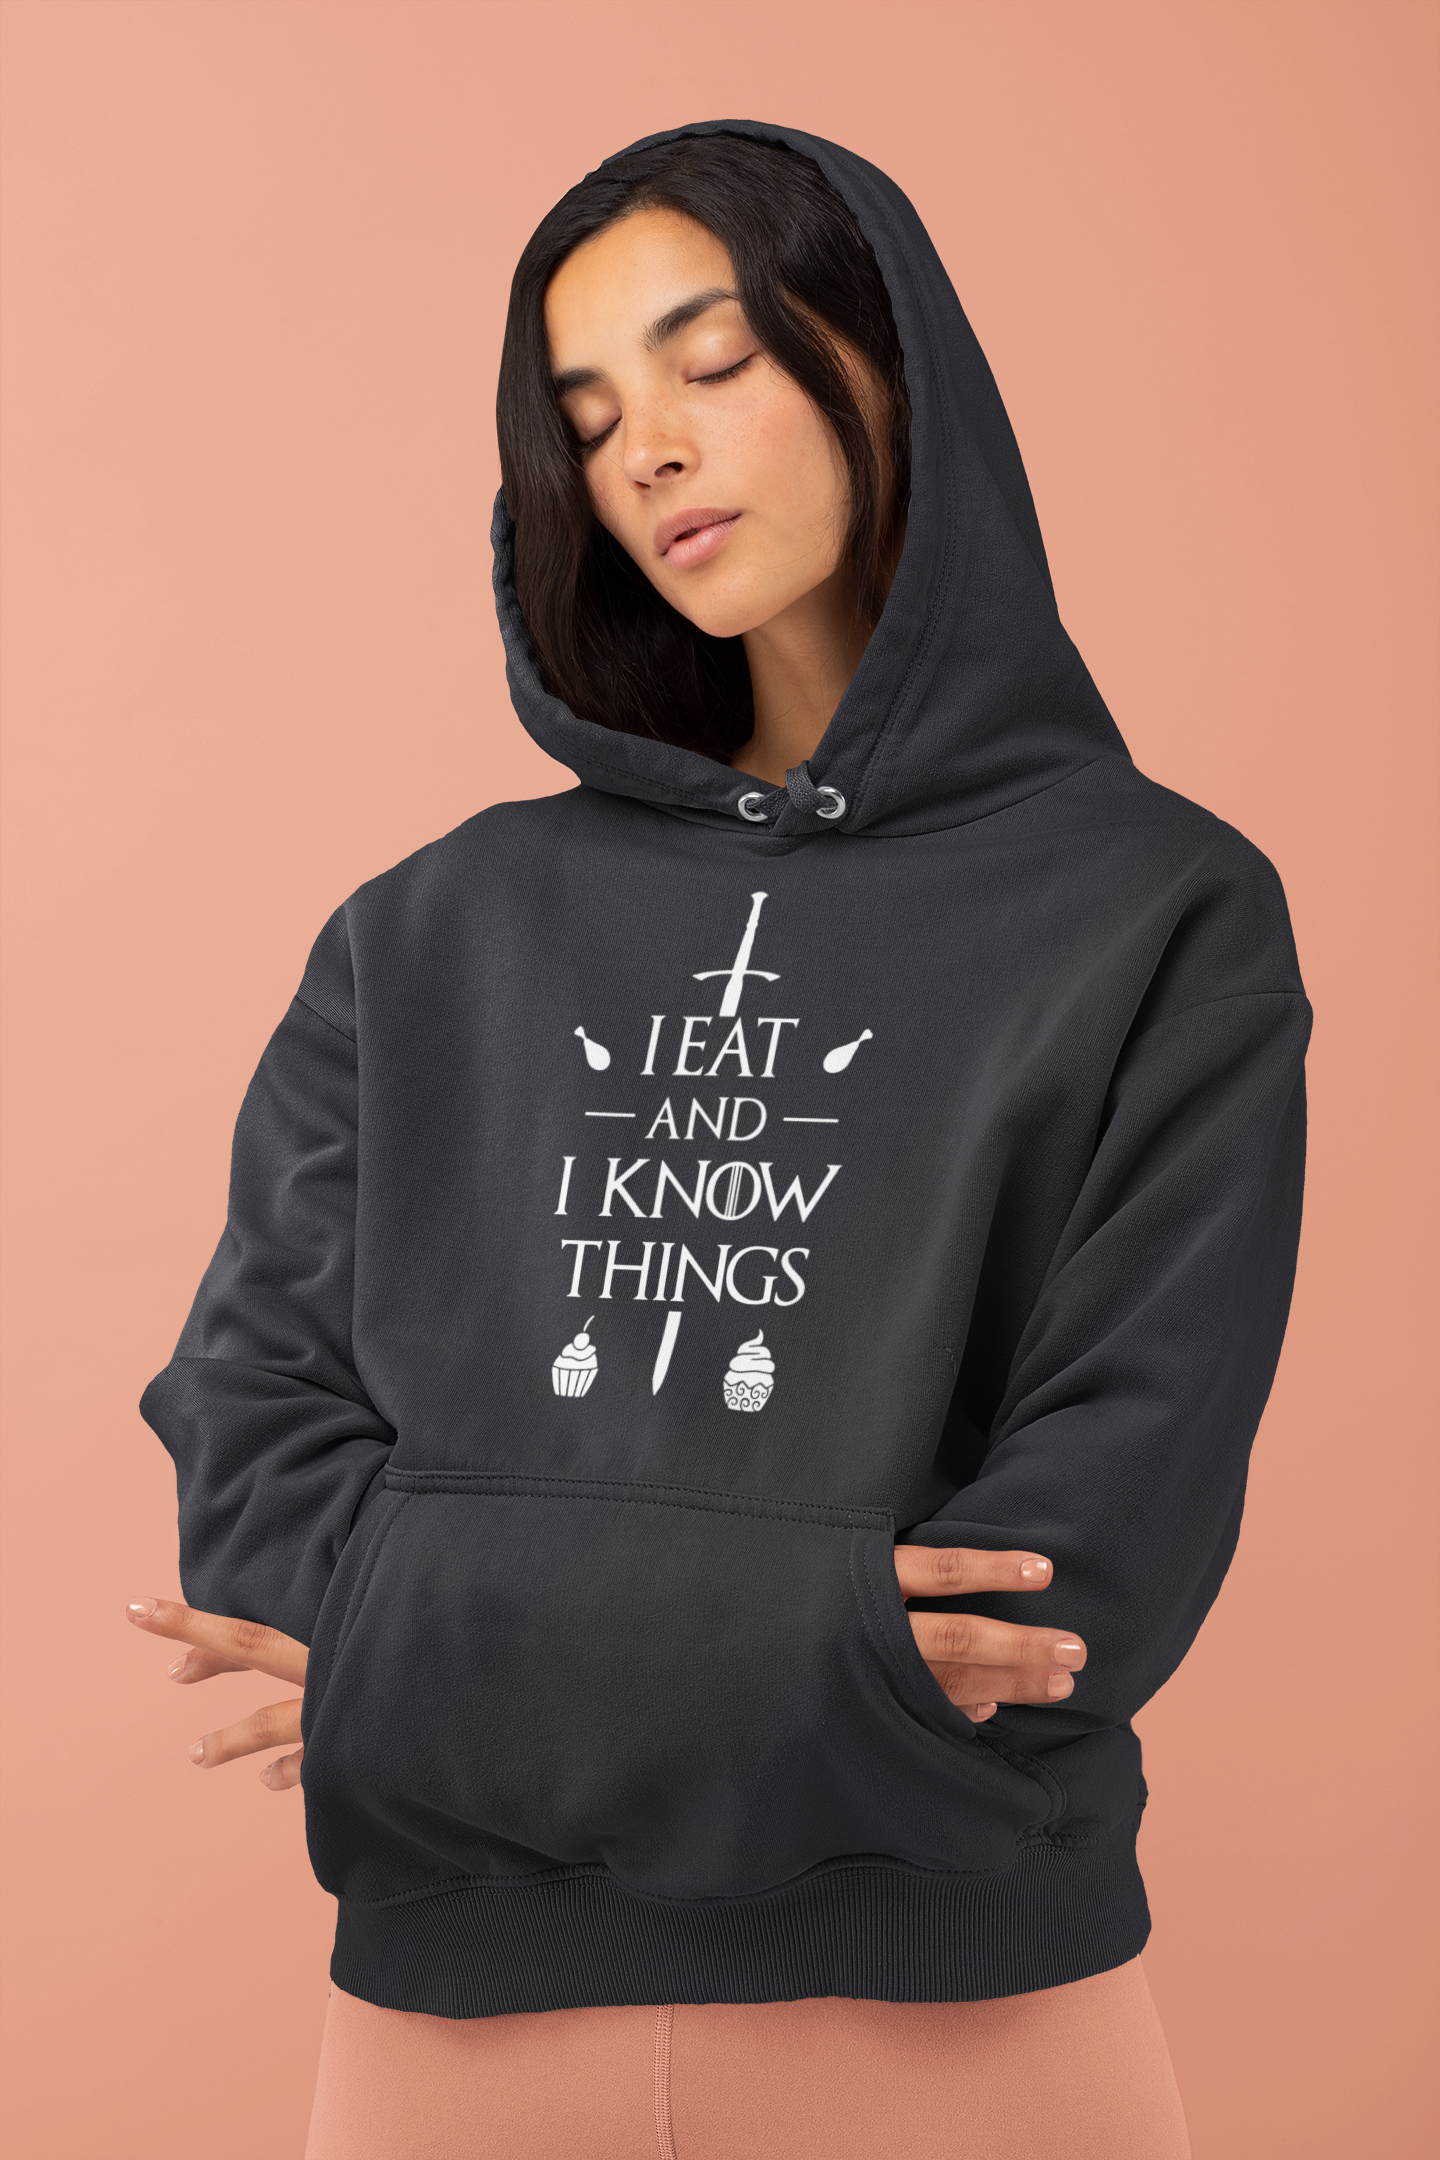 I Eat And I Know Things Funny Hoodies for Women-FunkyTeesClub